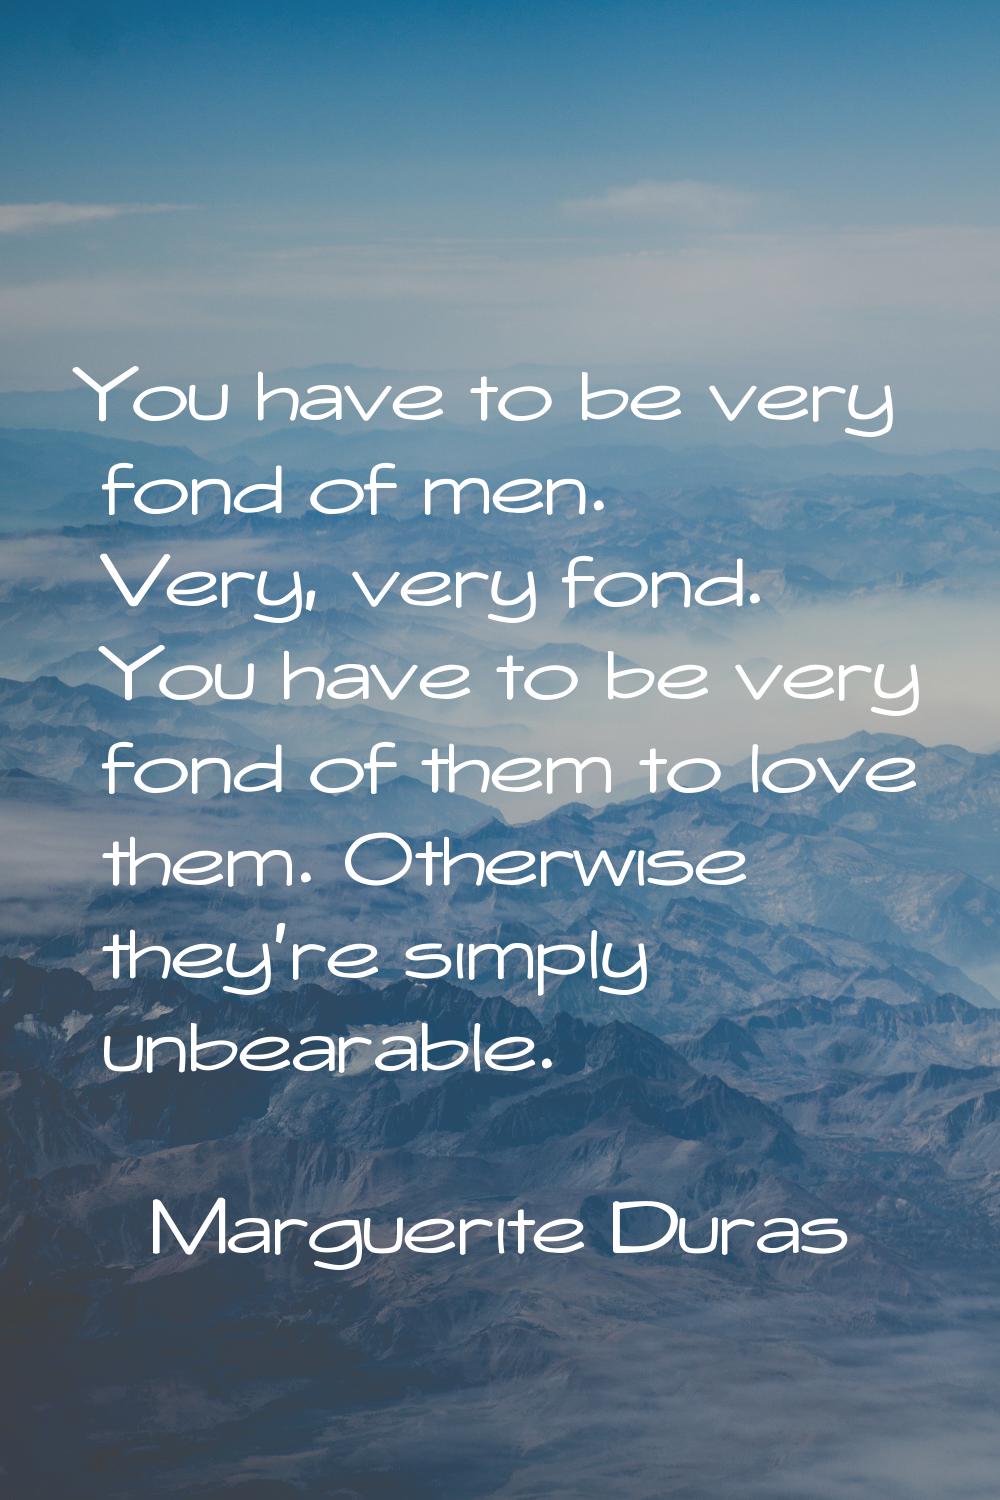 You have to be very fond of men. Very, very fond. You have to be very fond of them to love them. Ot